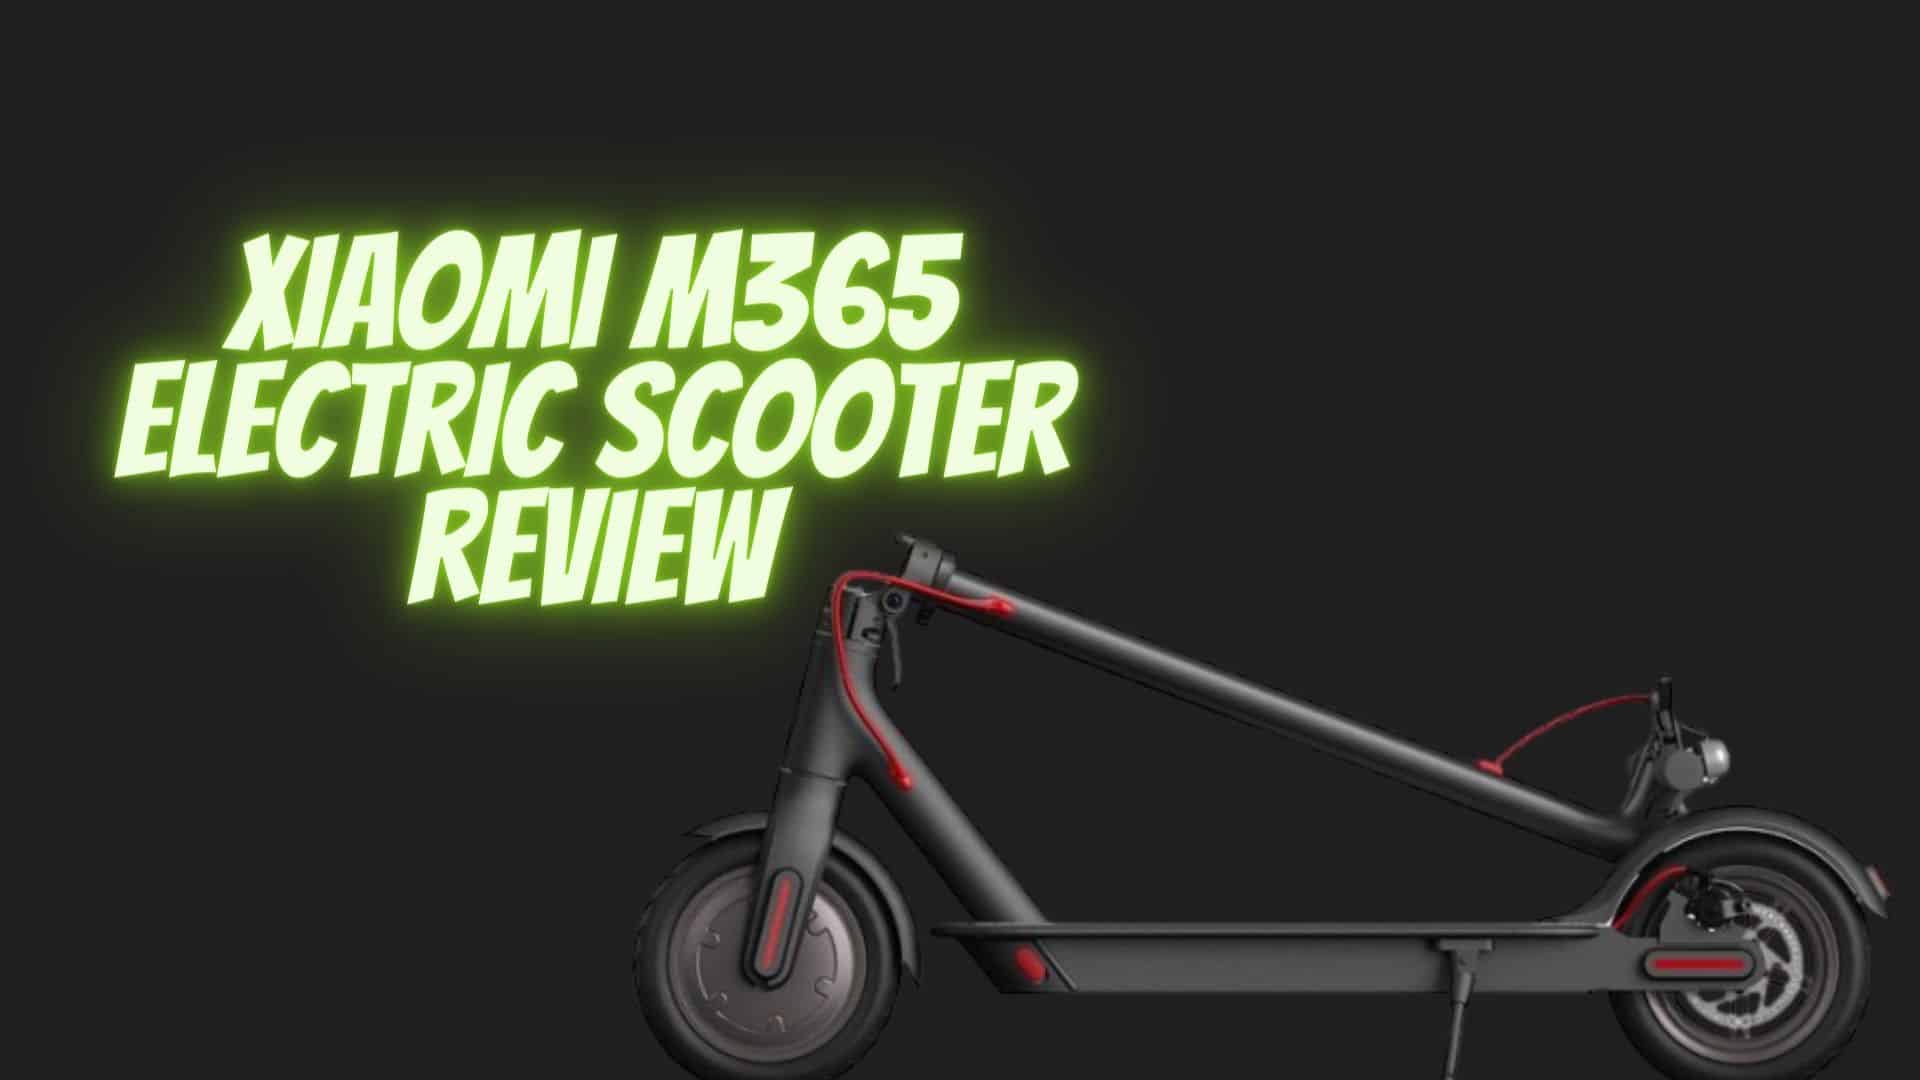 Xiaomi M365 Electric Scooter Review